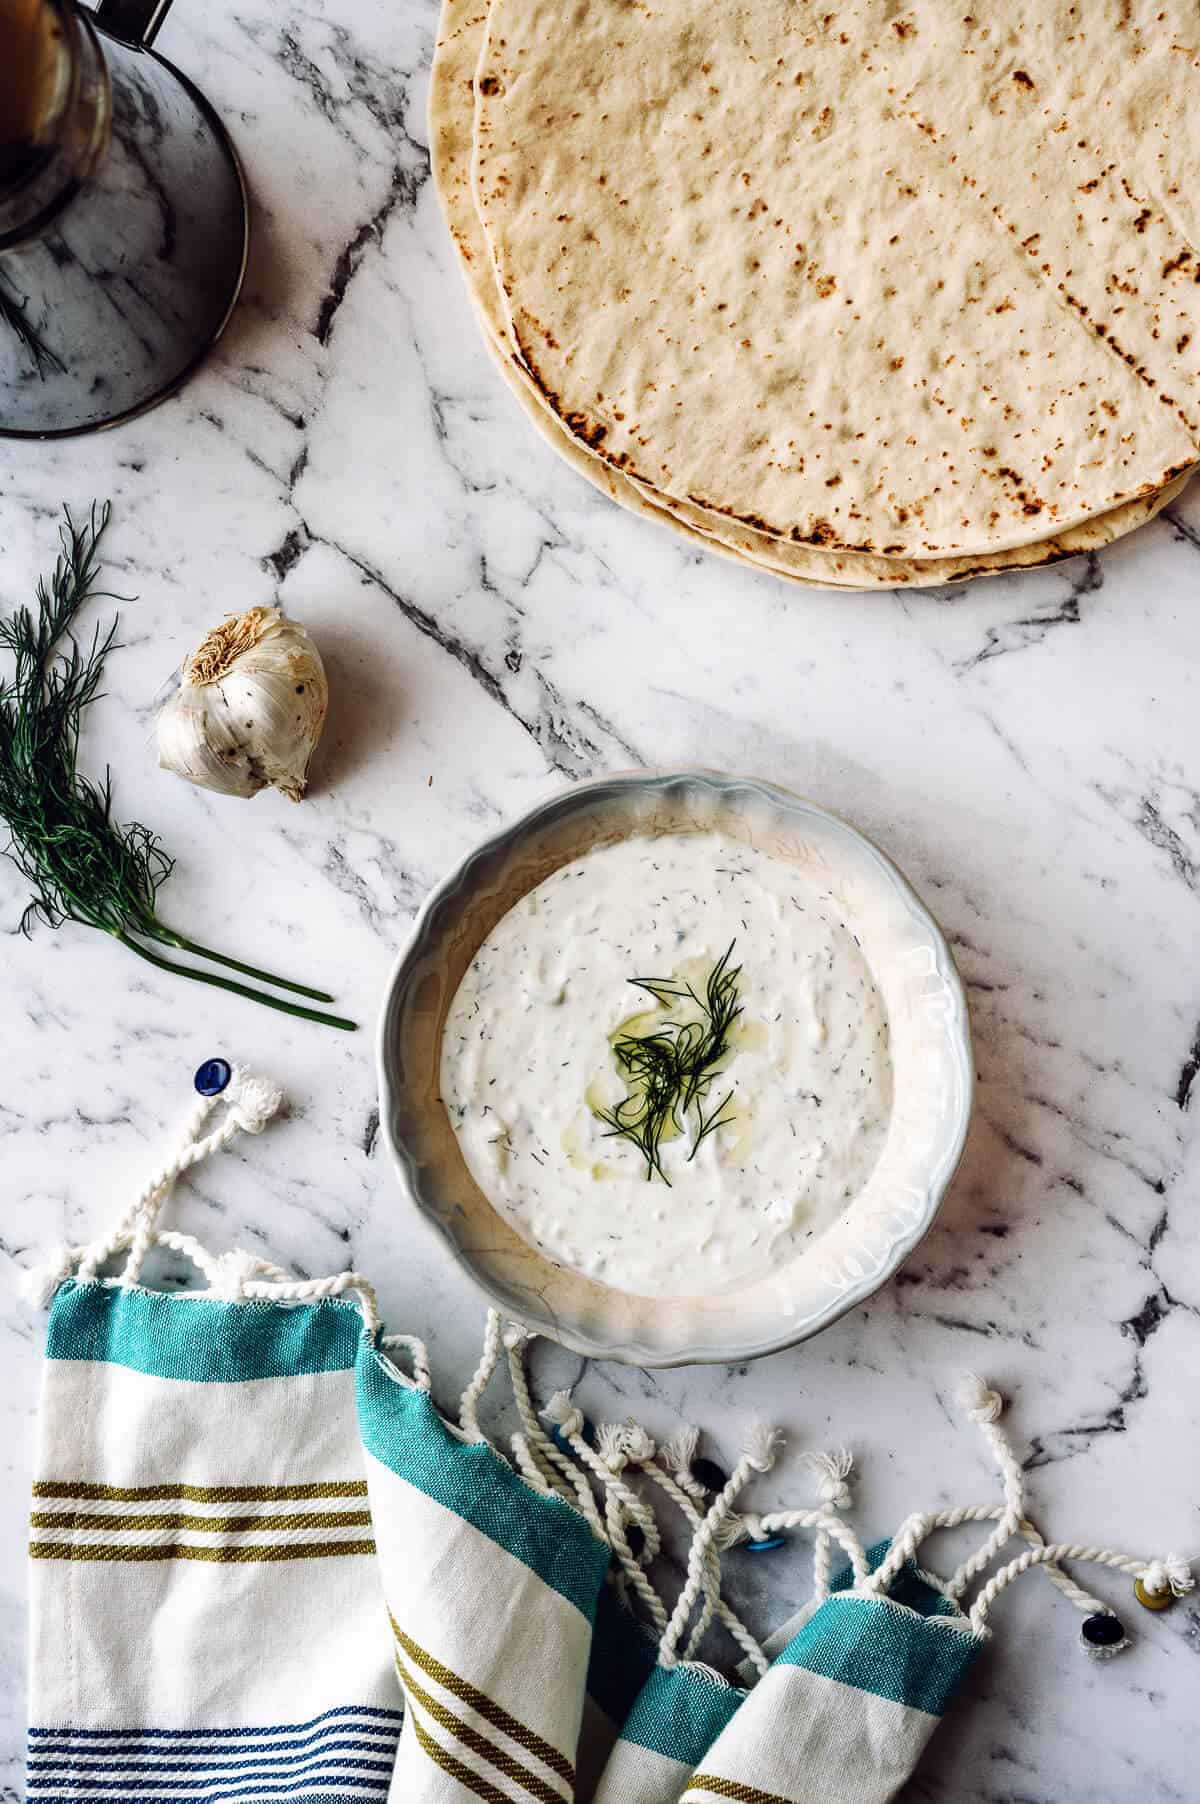 a bowl of tzatziki dip in the middle of the table served with pita bread